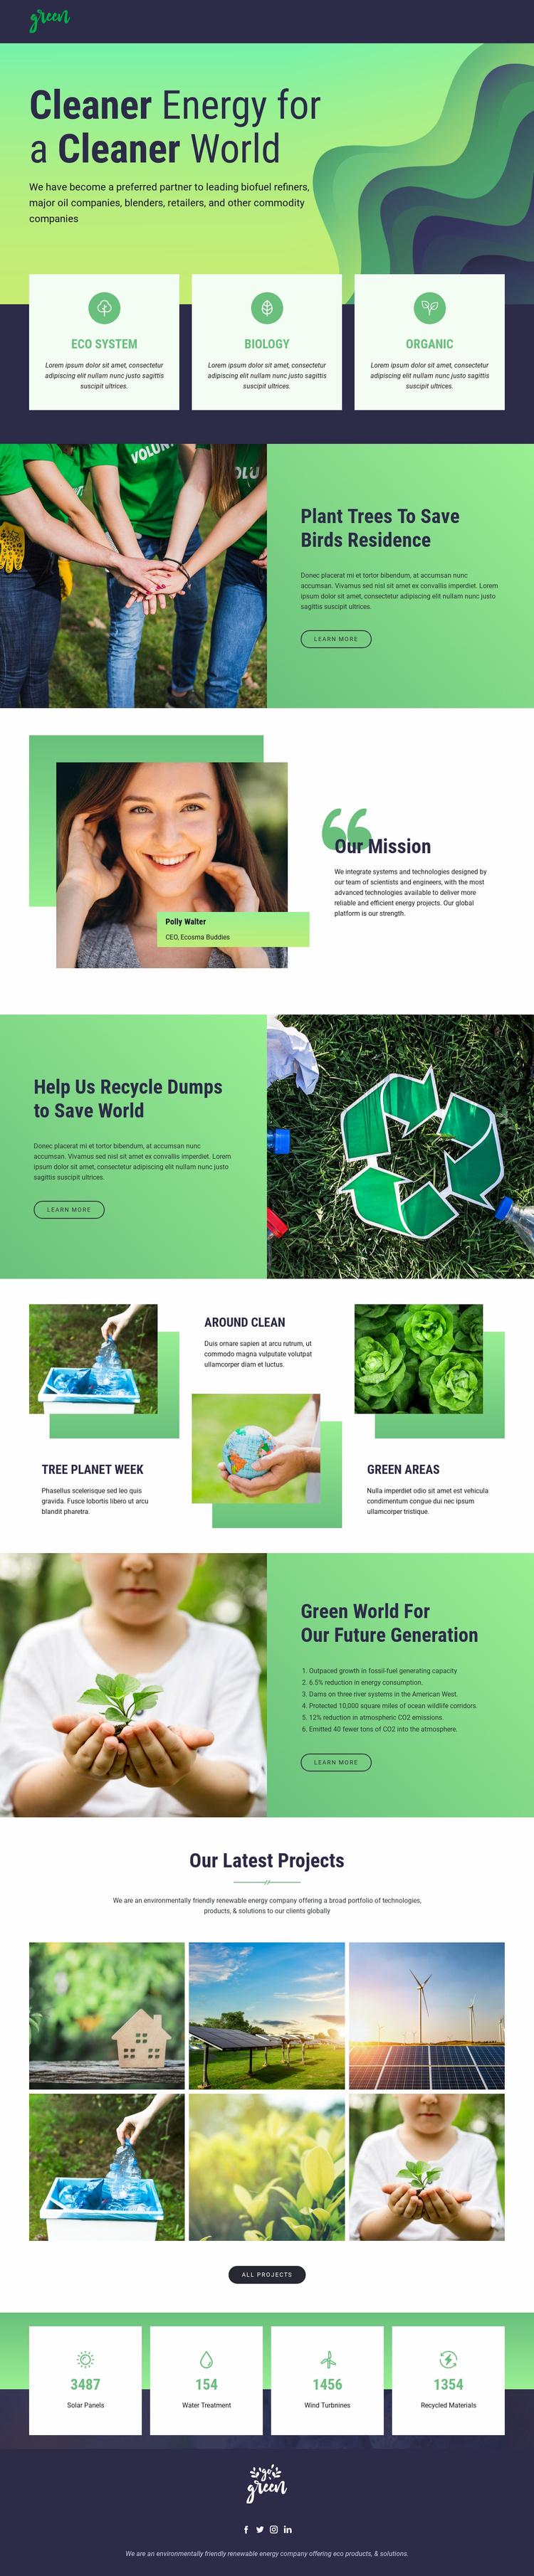 Clean energy to save nature Wix Template Alternative